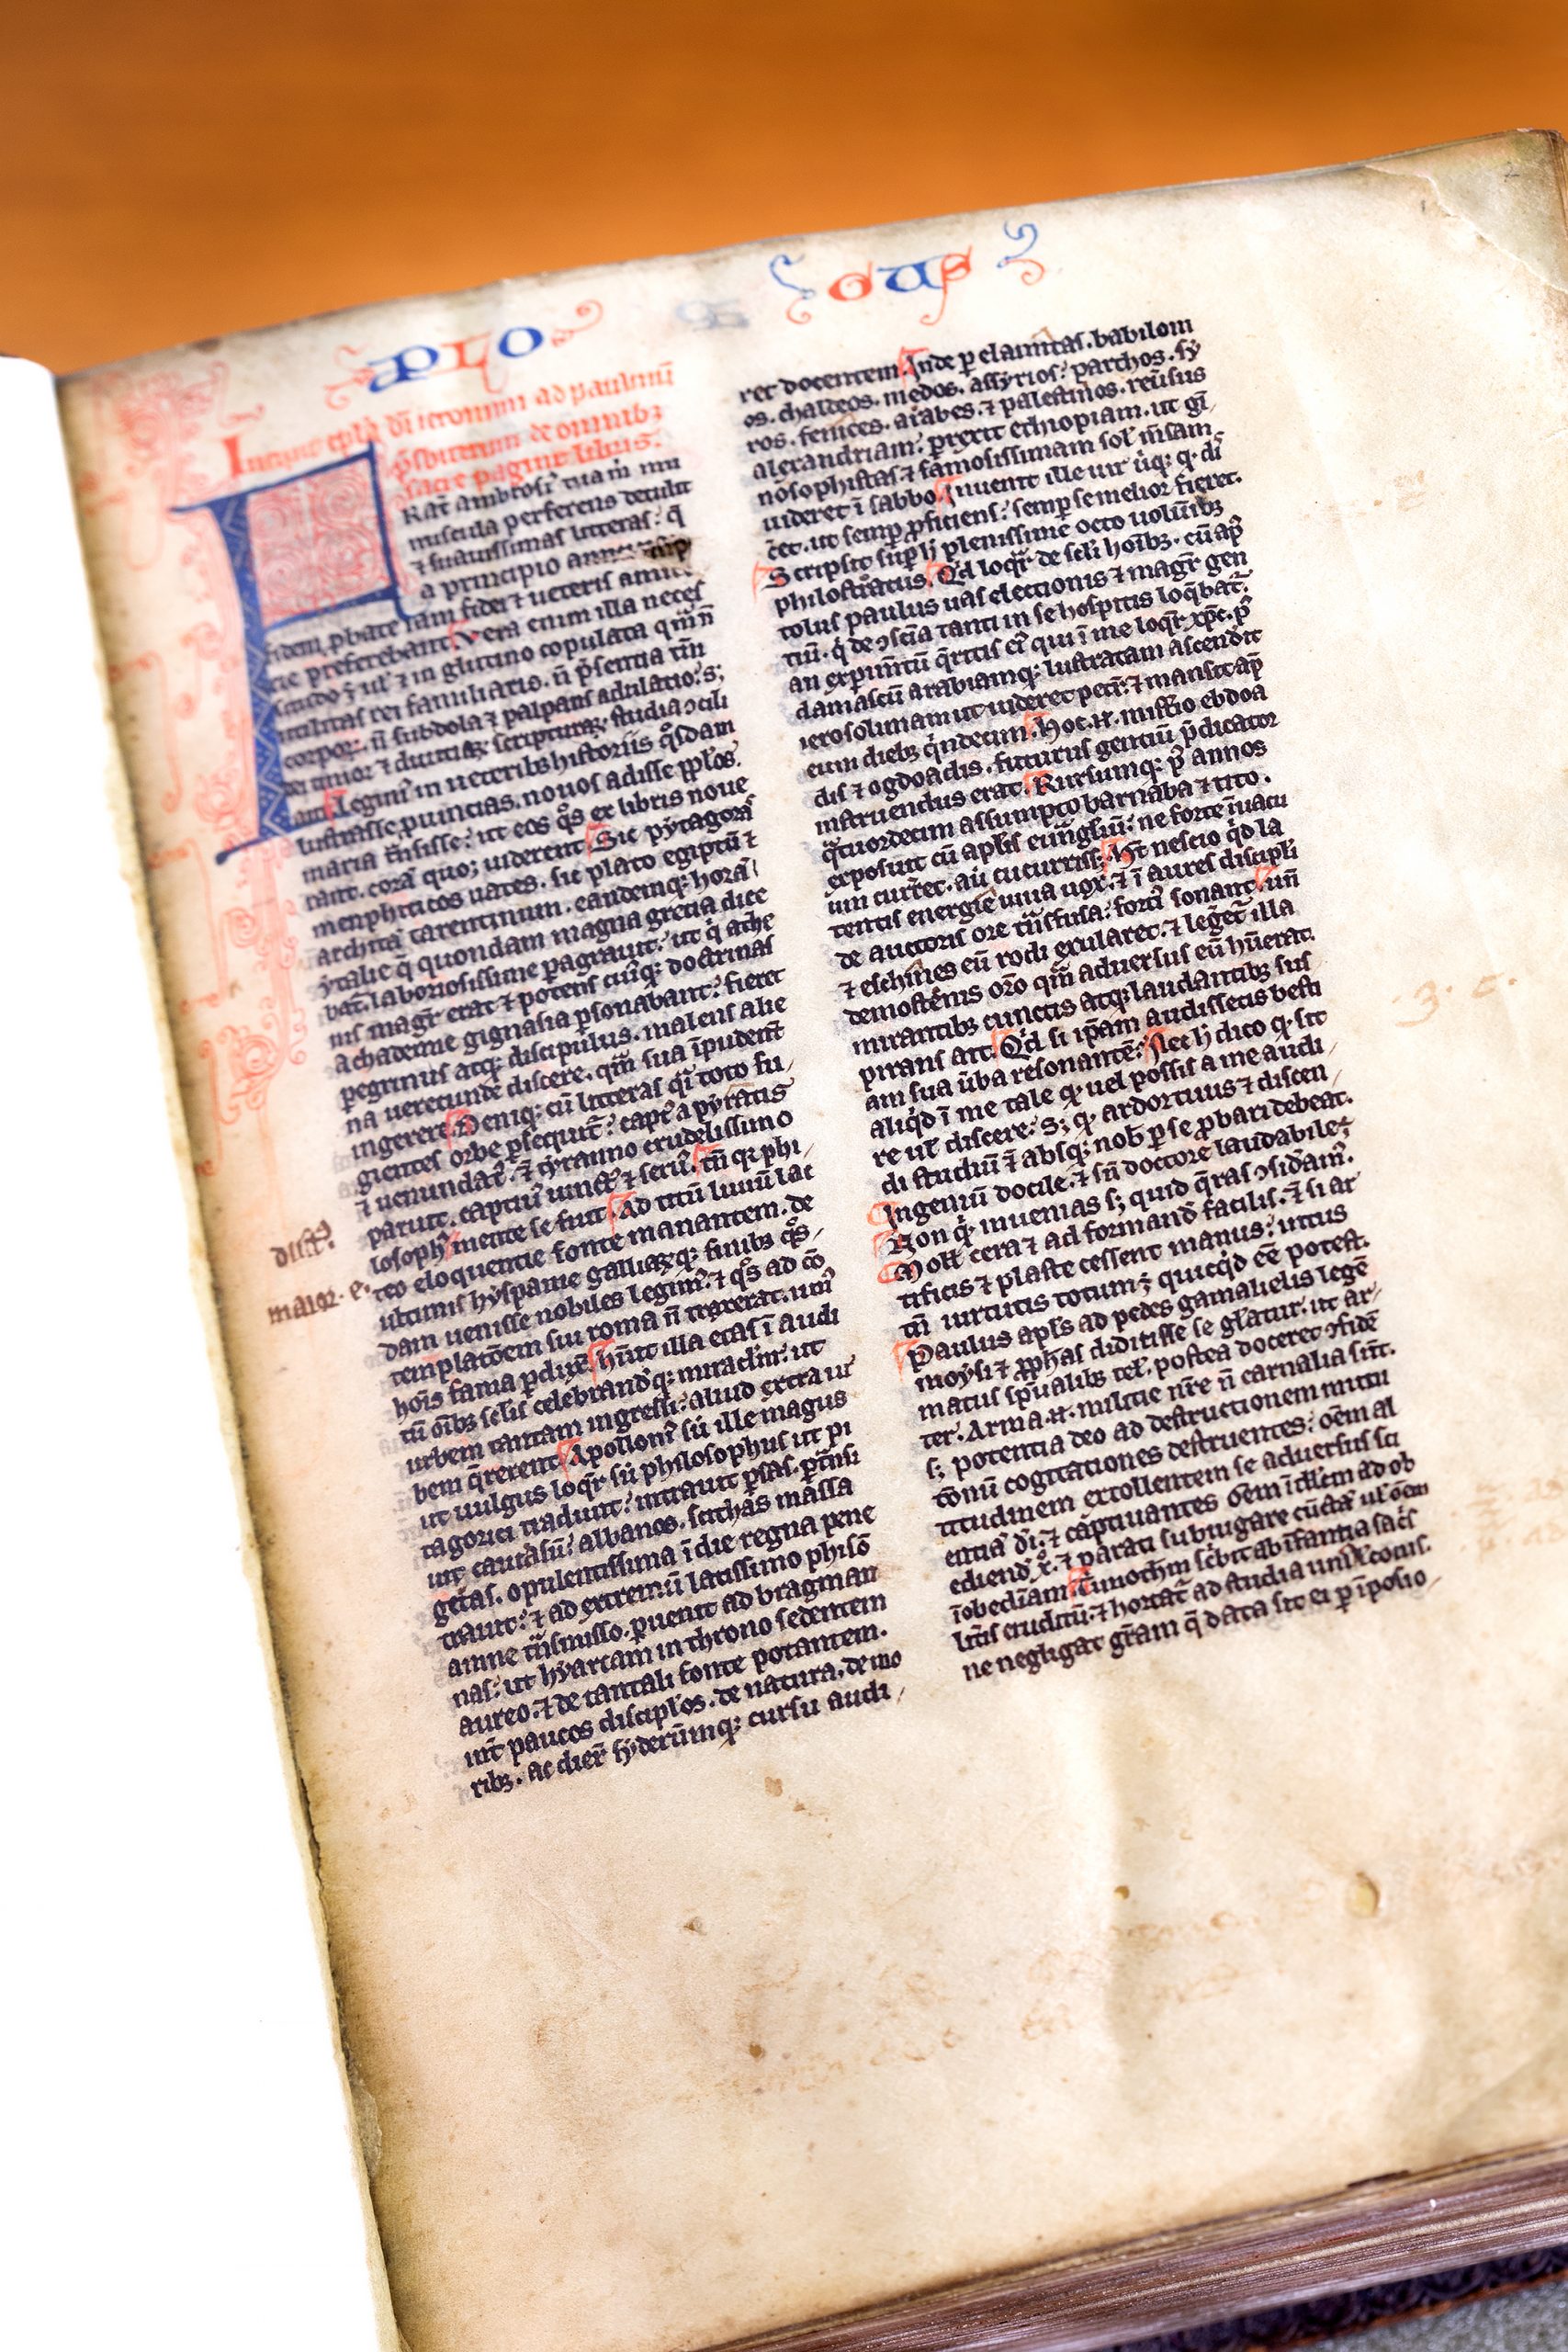 This Bible was made in Oxford, England, around 1240 AD — almost 800 years ago. While modern Bibles begin with the Latin words “In principio” (“In the beginning”), medieval Bibles opened with a prologue that began with the letter F. In this instance, the F looks like a square P.